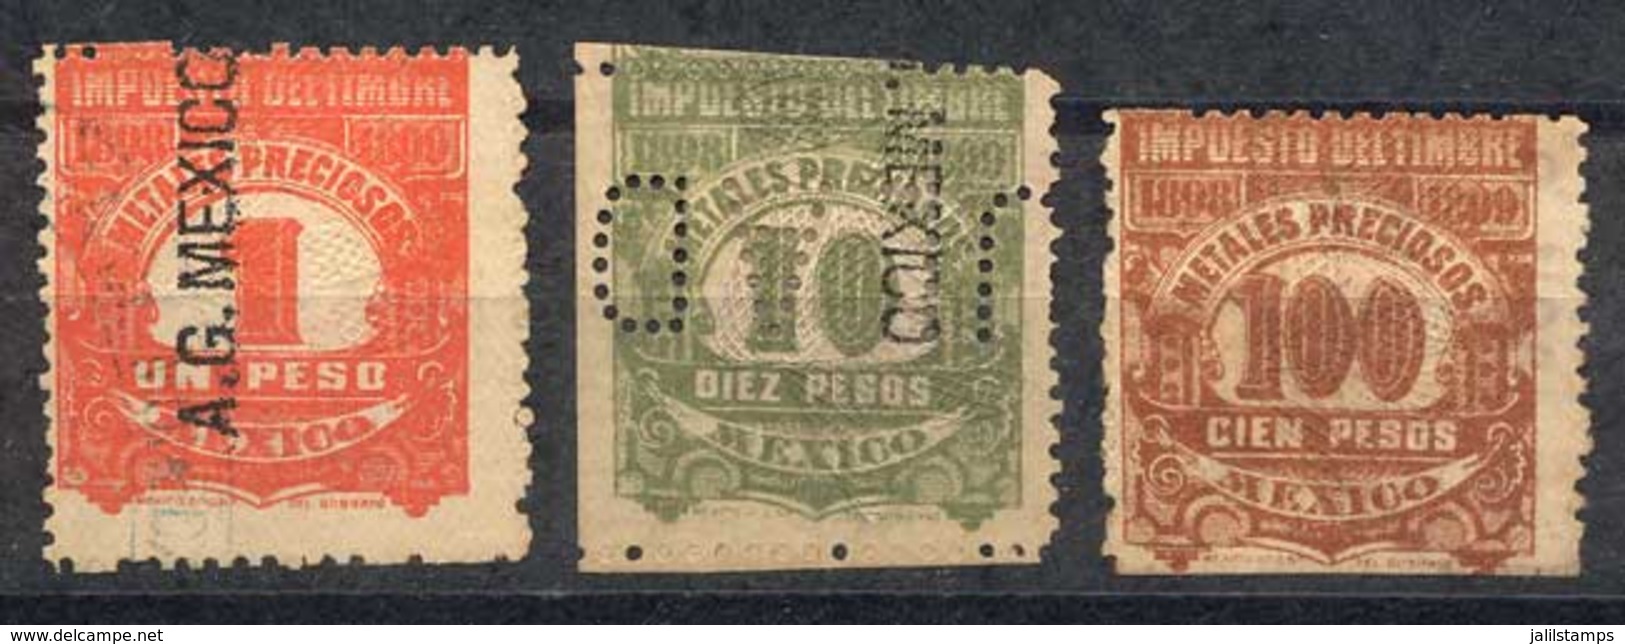 MEXICO: PRECIOUS METALS: Year 1898, 3 Stamps Between $1 And $100, Fine General Quality, Rare! - Mexiko